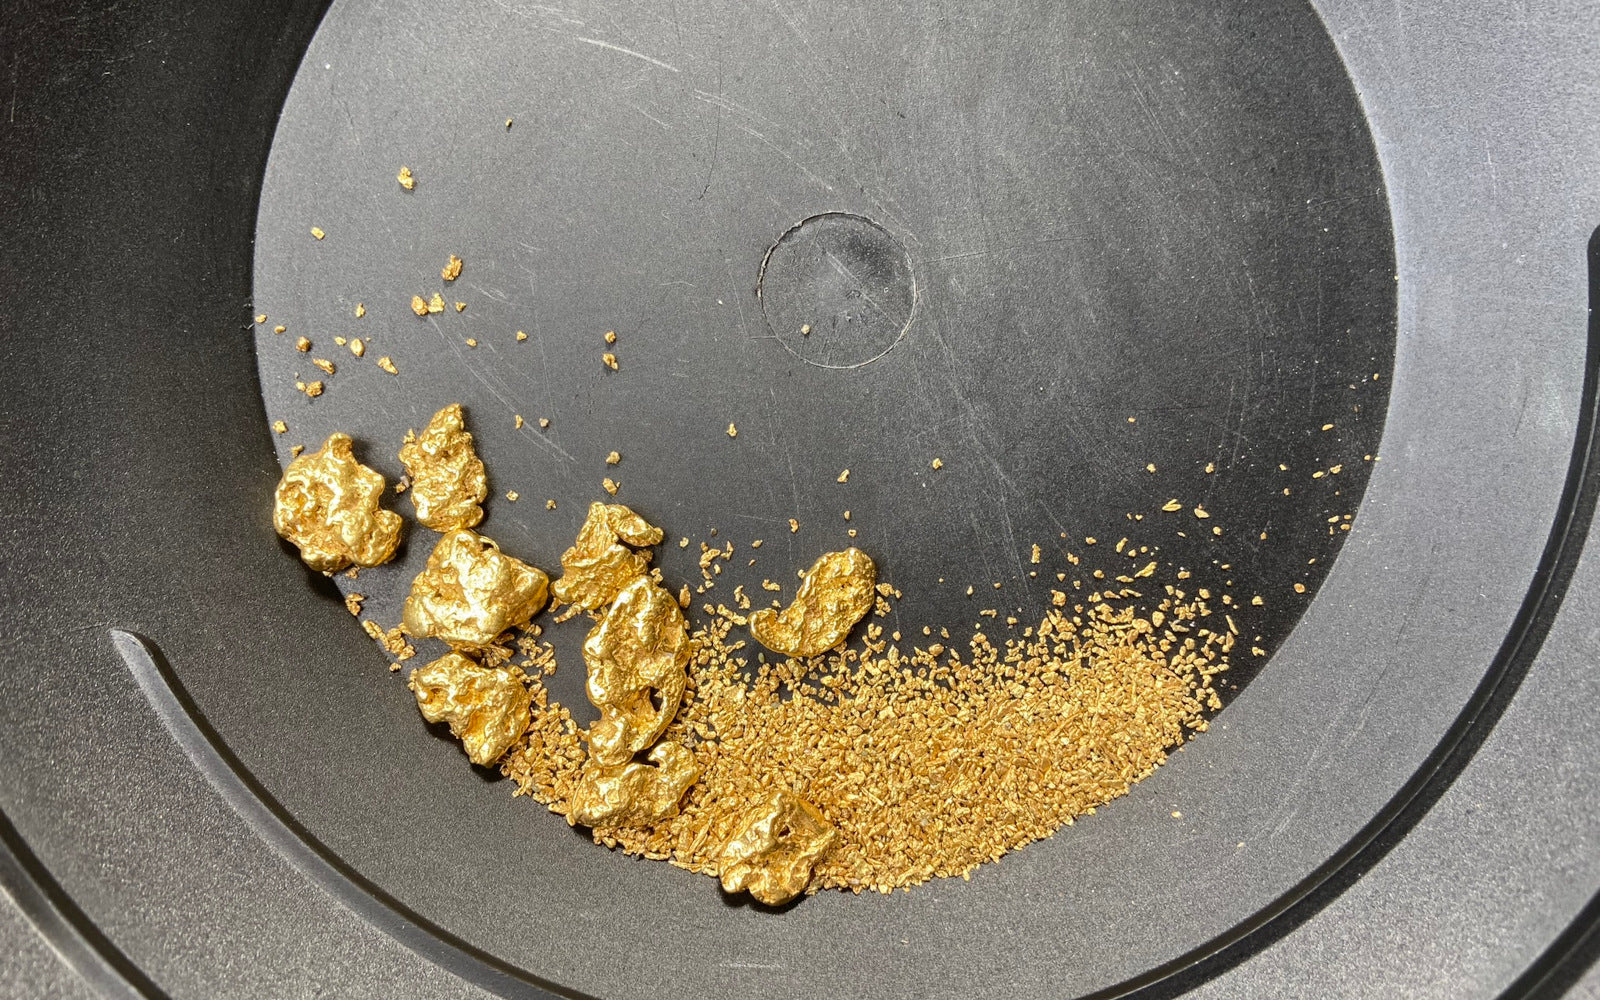 Gold Nuggets For Sale - Fantastic deal on a Pay Dirt Bucket with One Troy  Ounce of Alaska Gold Guaranteed! Click the link below to learn more.   paydirt-one-troy-ounce-gold-guaranteed